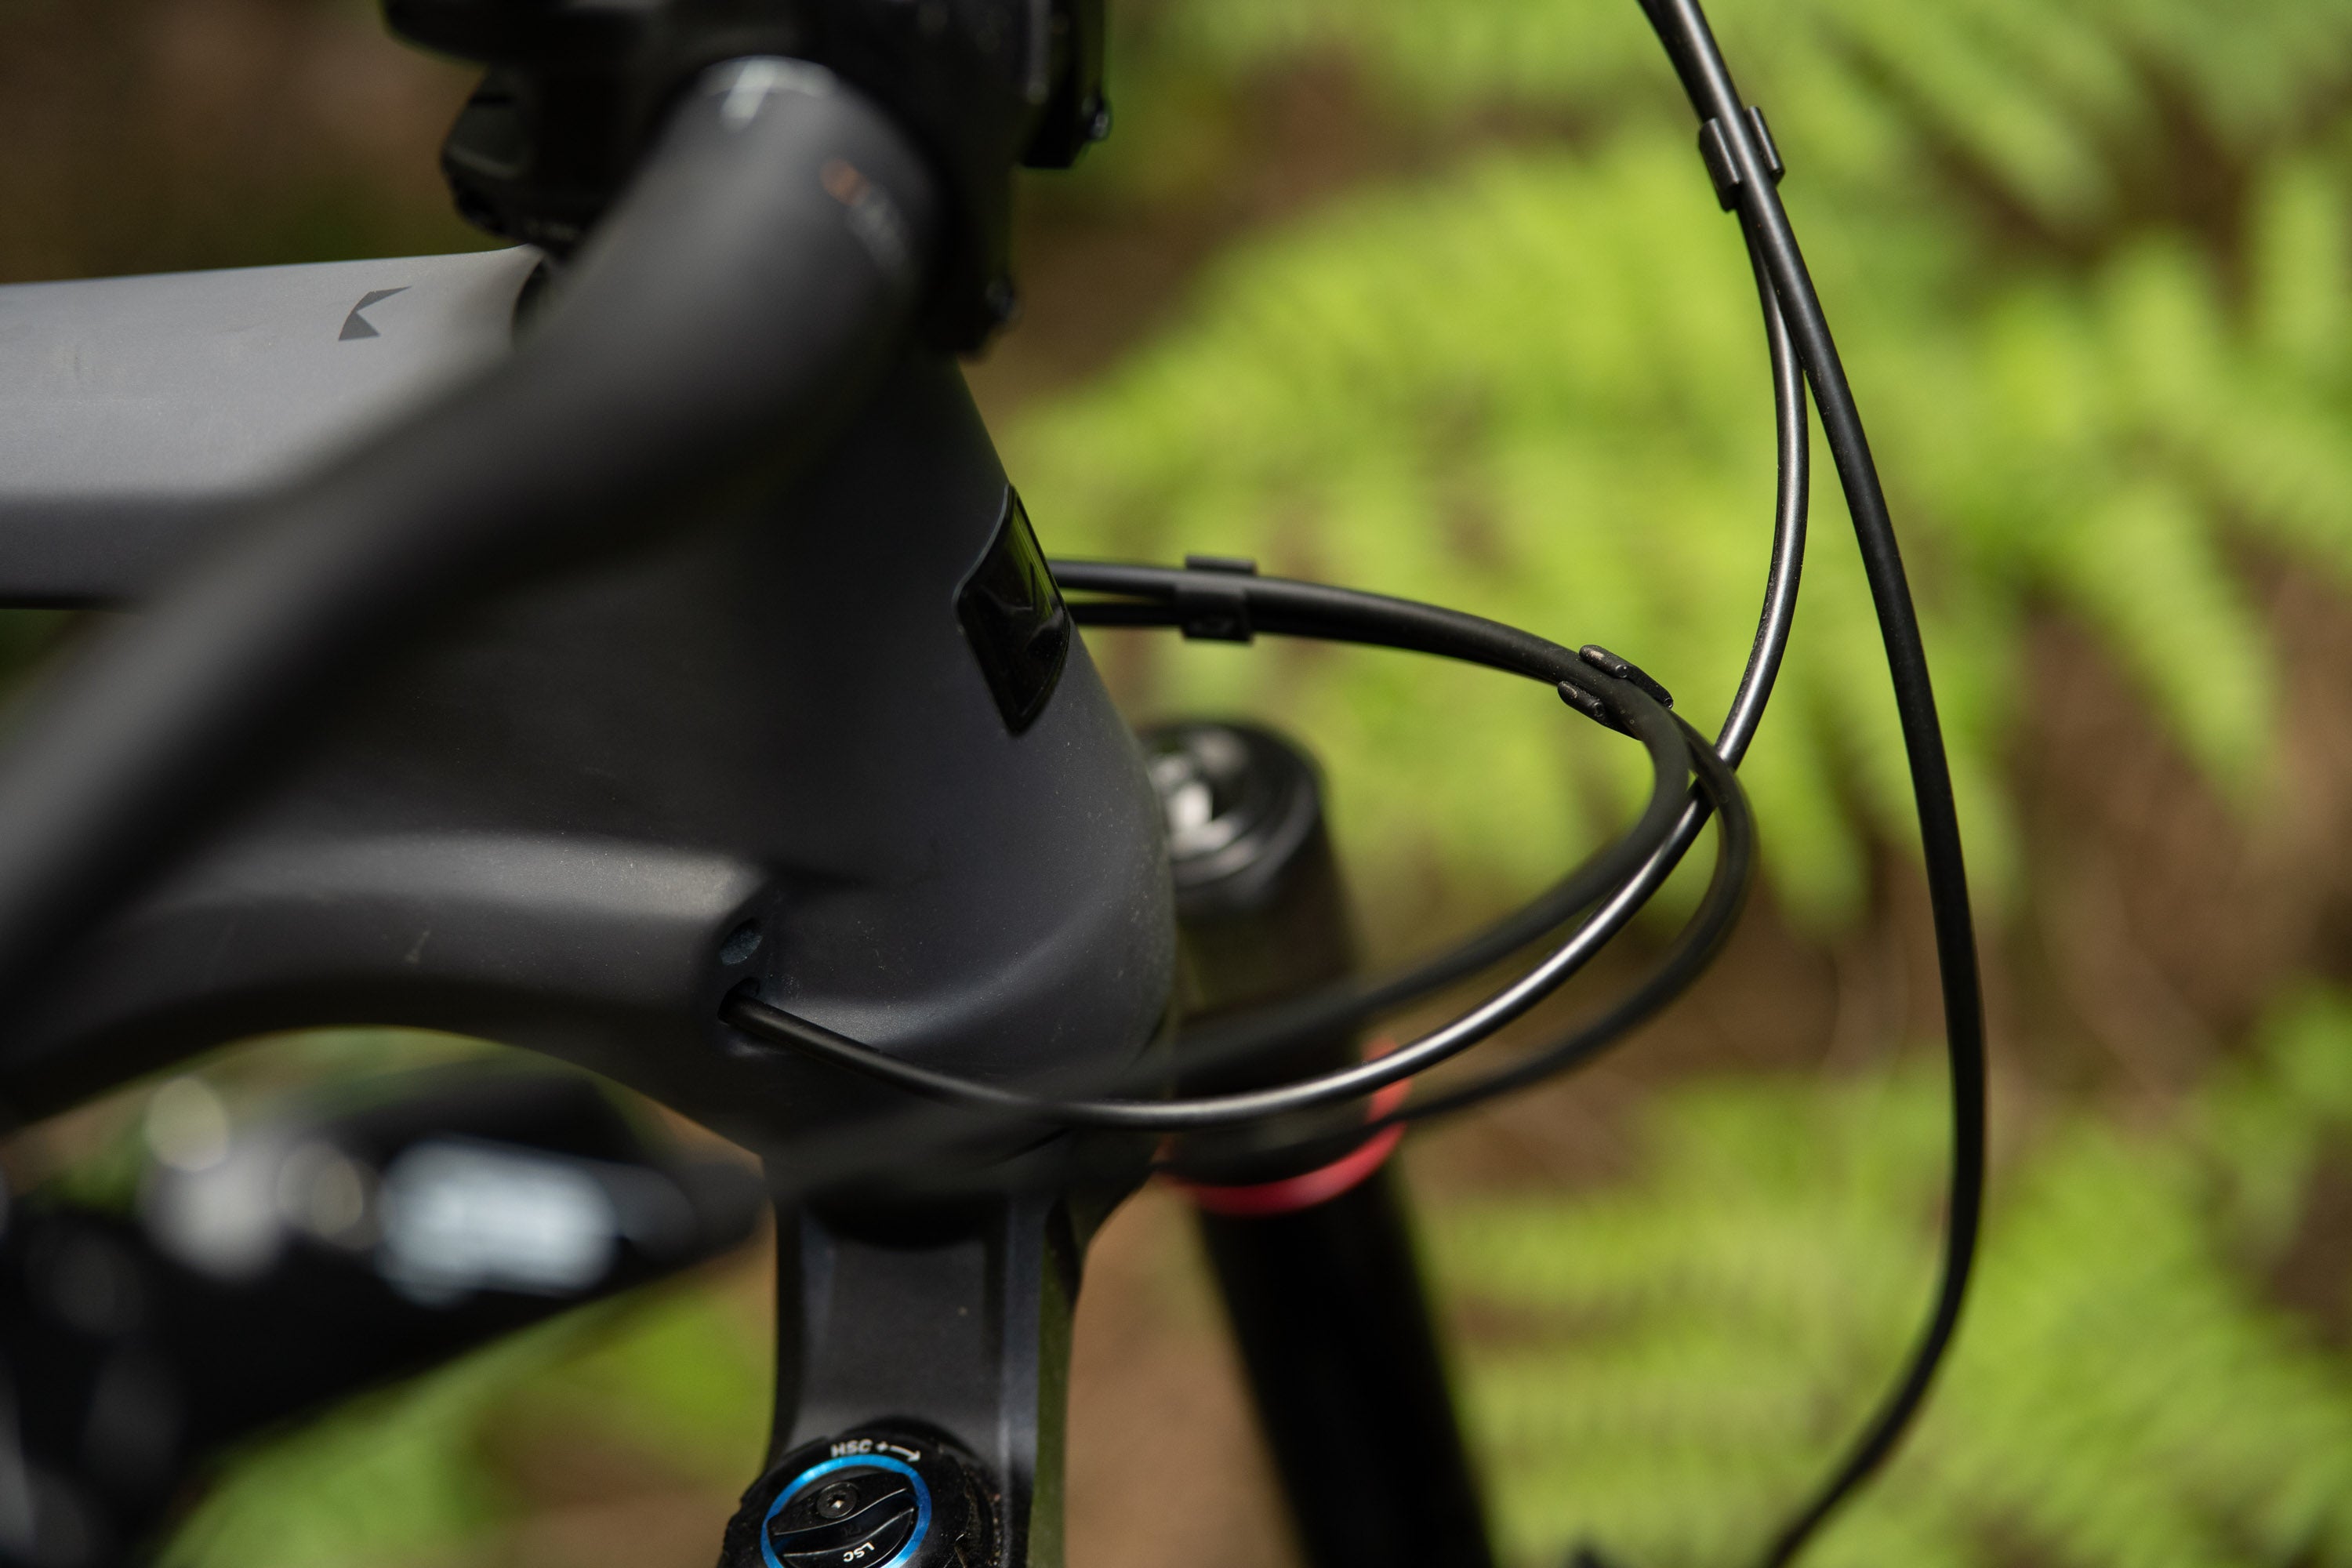 The cleaner cable routing of the new Insurgent